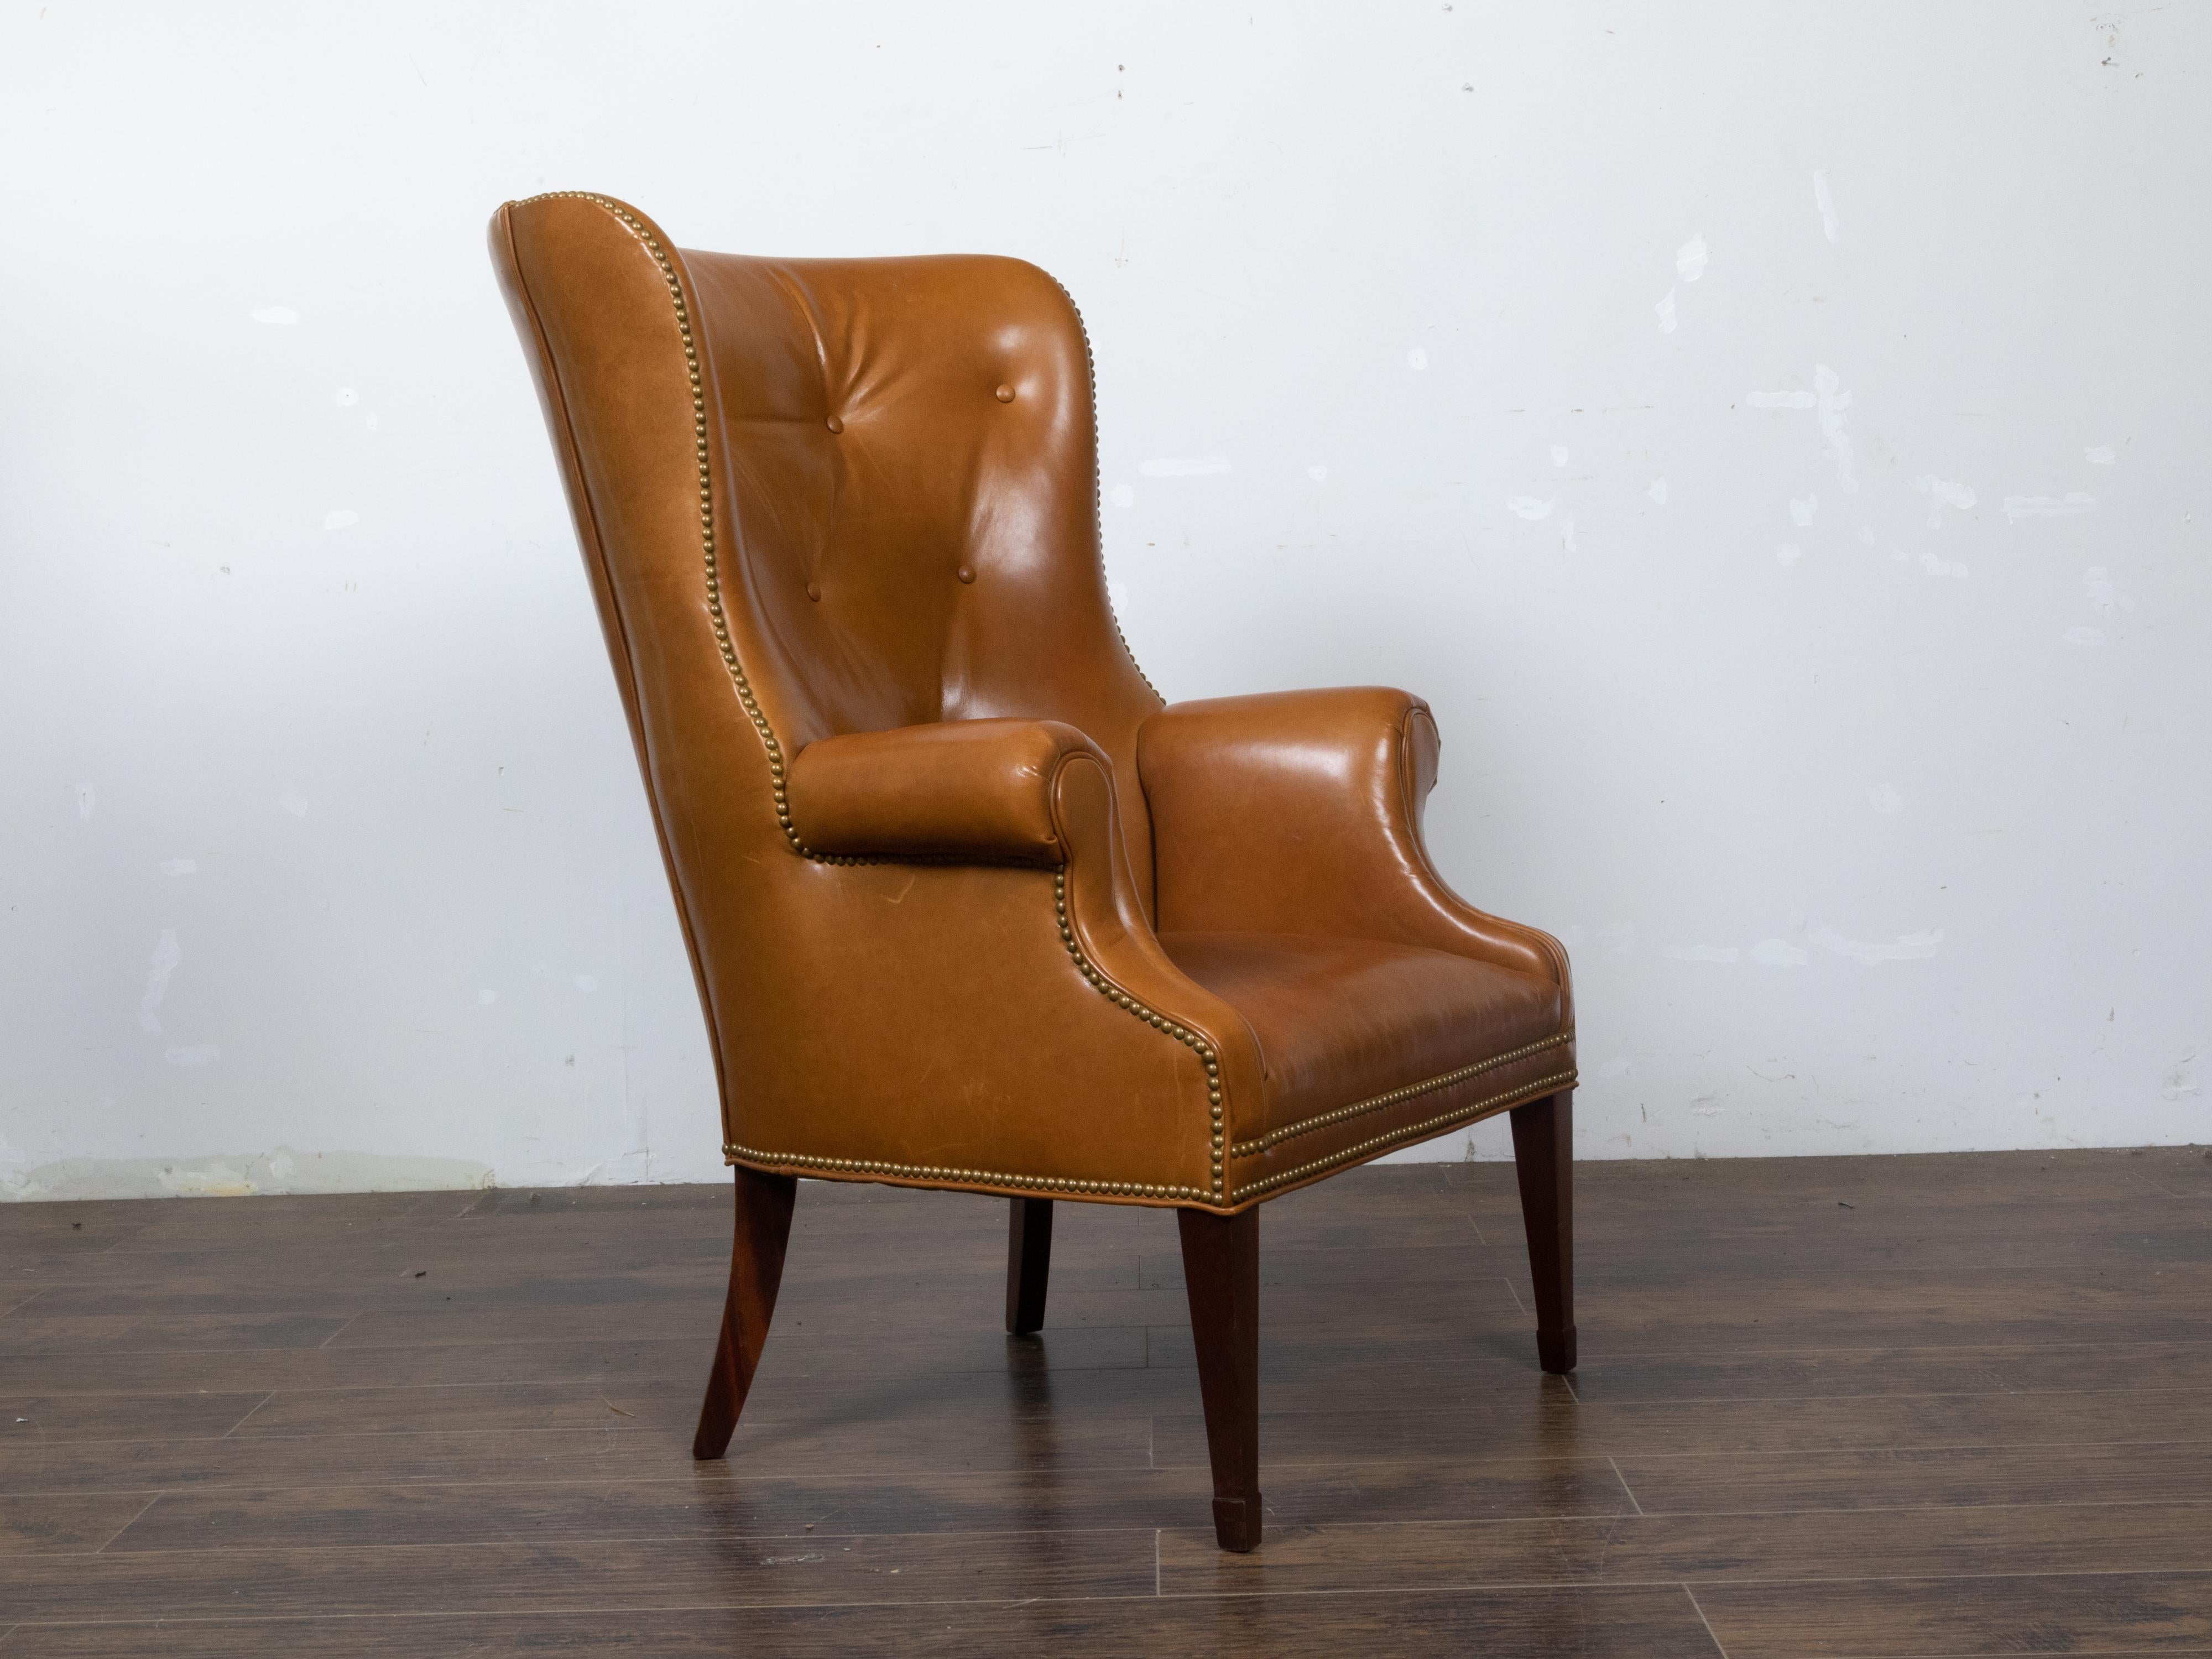 English Brown Leather Wingback Chair with Brass Nailhead Trim, circa 1930-1940 In Good Condition For Sale In Atlanta, GA